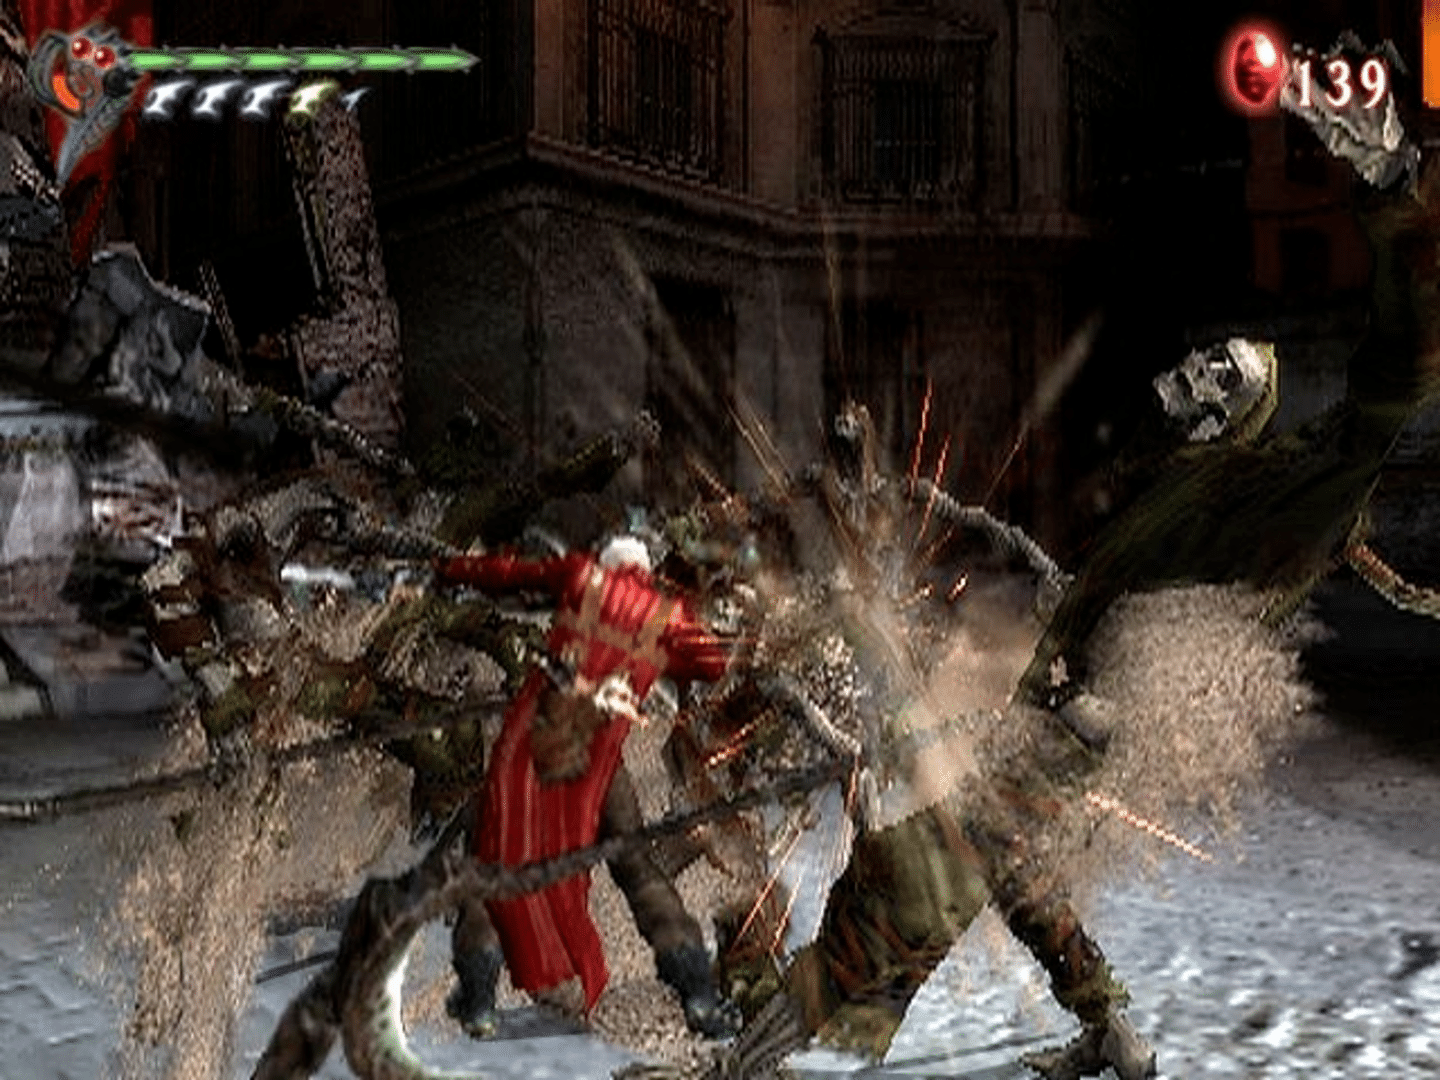 Devil May Cry 4 Devil May Cry 2 Devil May Cry 3: Dante's Awakening DmC: Devil  May Cry Video game, devil may cry, game, boss png